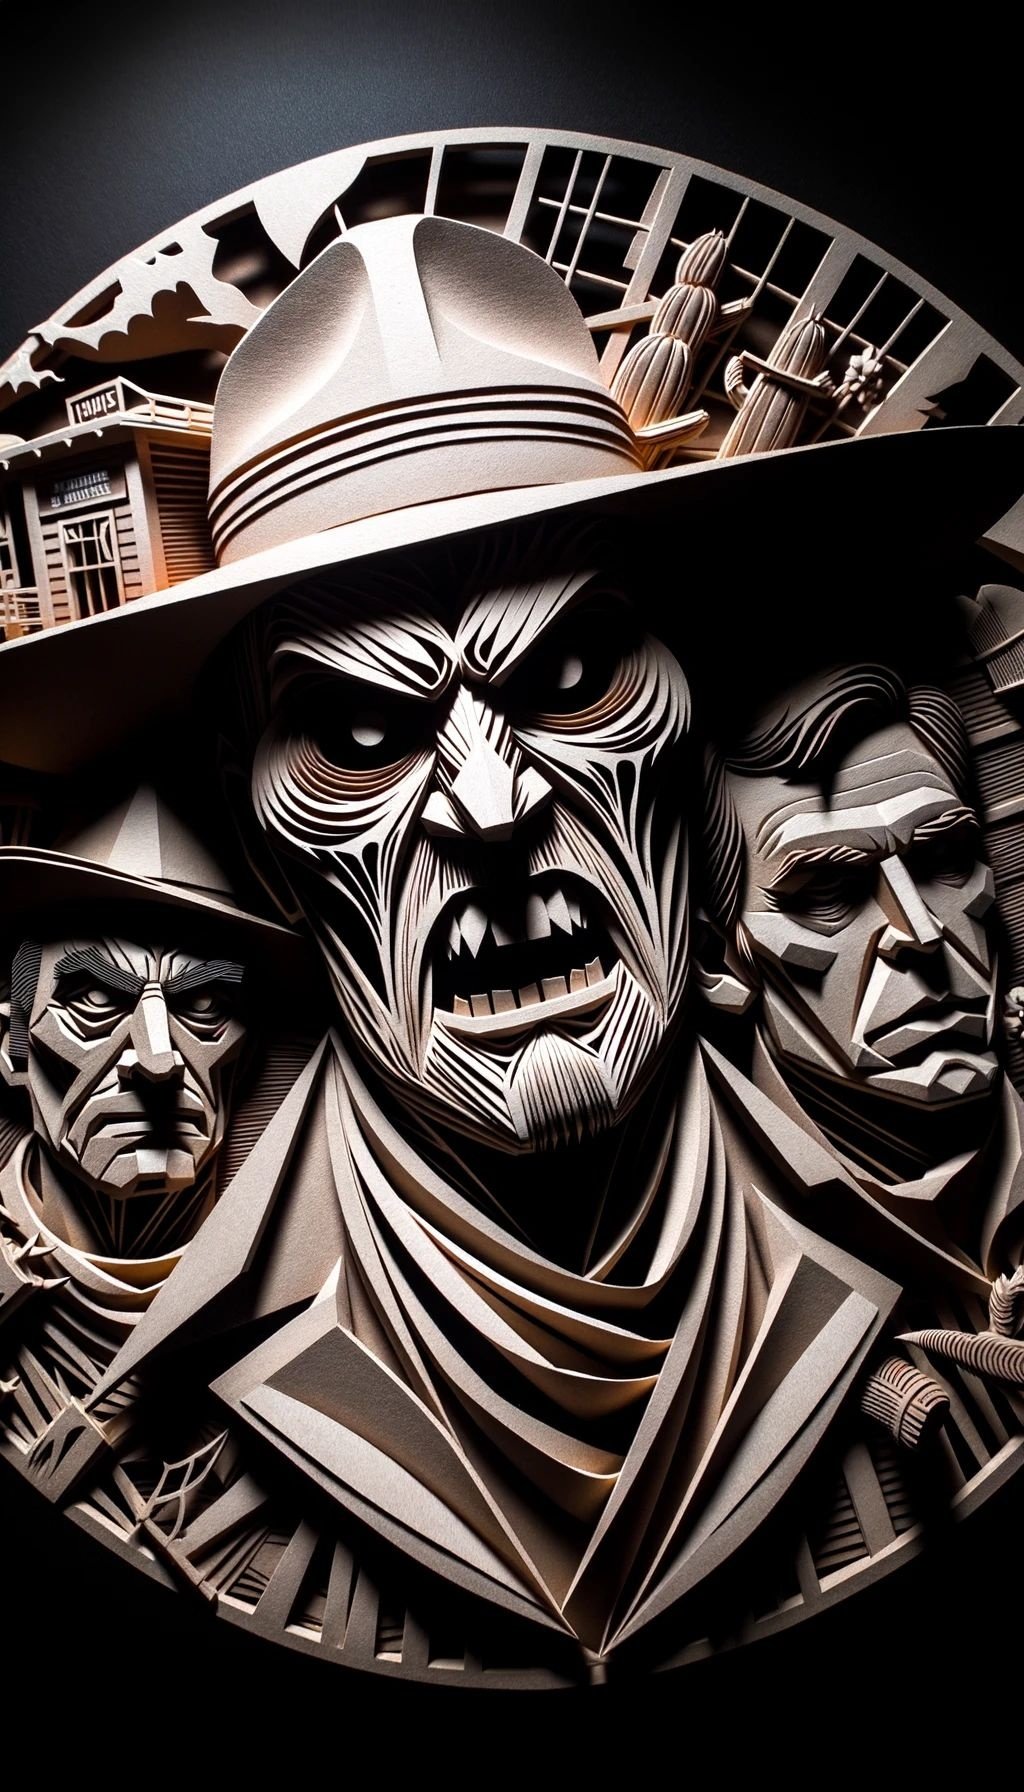 Prompt: Paper cut art of a menacing figure reminiscent of classic horror, set against cowboy imagery. The artwork is captured with the distinct characteristics of a wide-angle lens, similar to the essence of the tokina at-x 11-16mm f/2.8 pro dx ii. Intense shadows, wood sculptor textures, and pronounced brushwork enhance the visual drama. The close-up intensity is further amplified by softbox lighting.